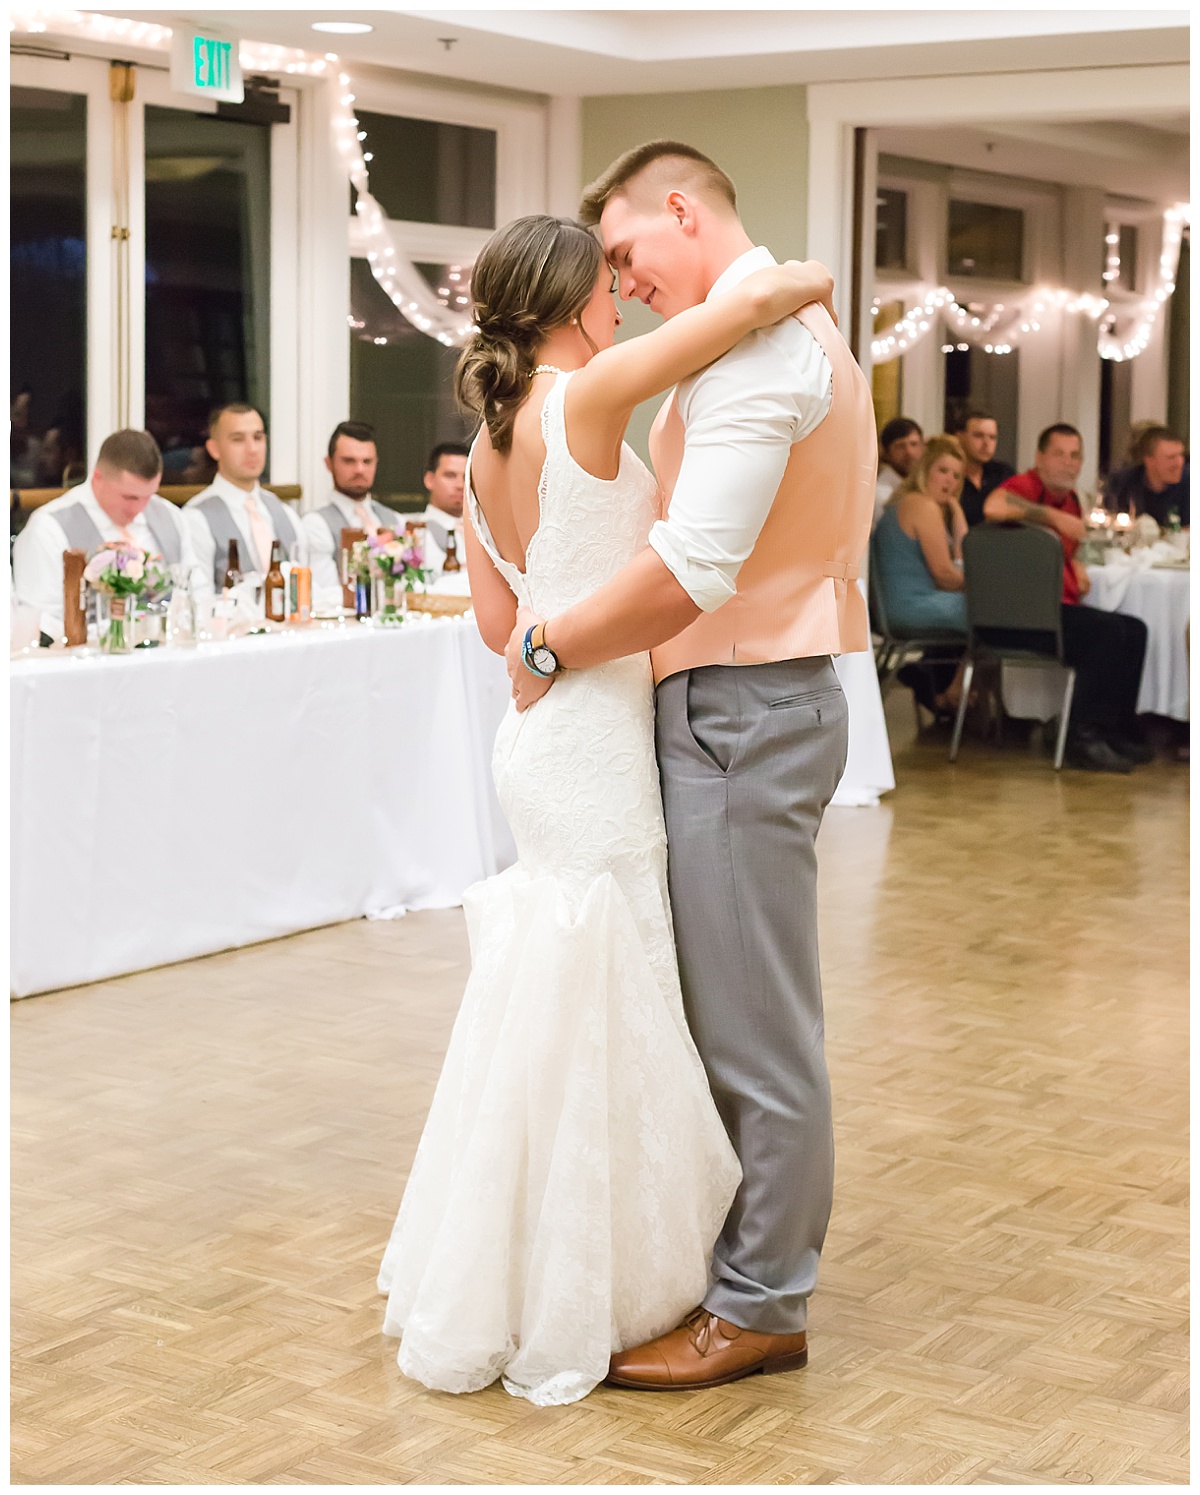 Orchard Ridge Country Club wedding photos by Simply Seeking Photography